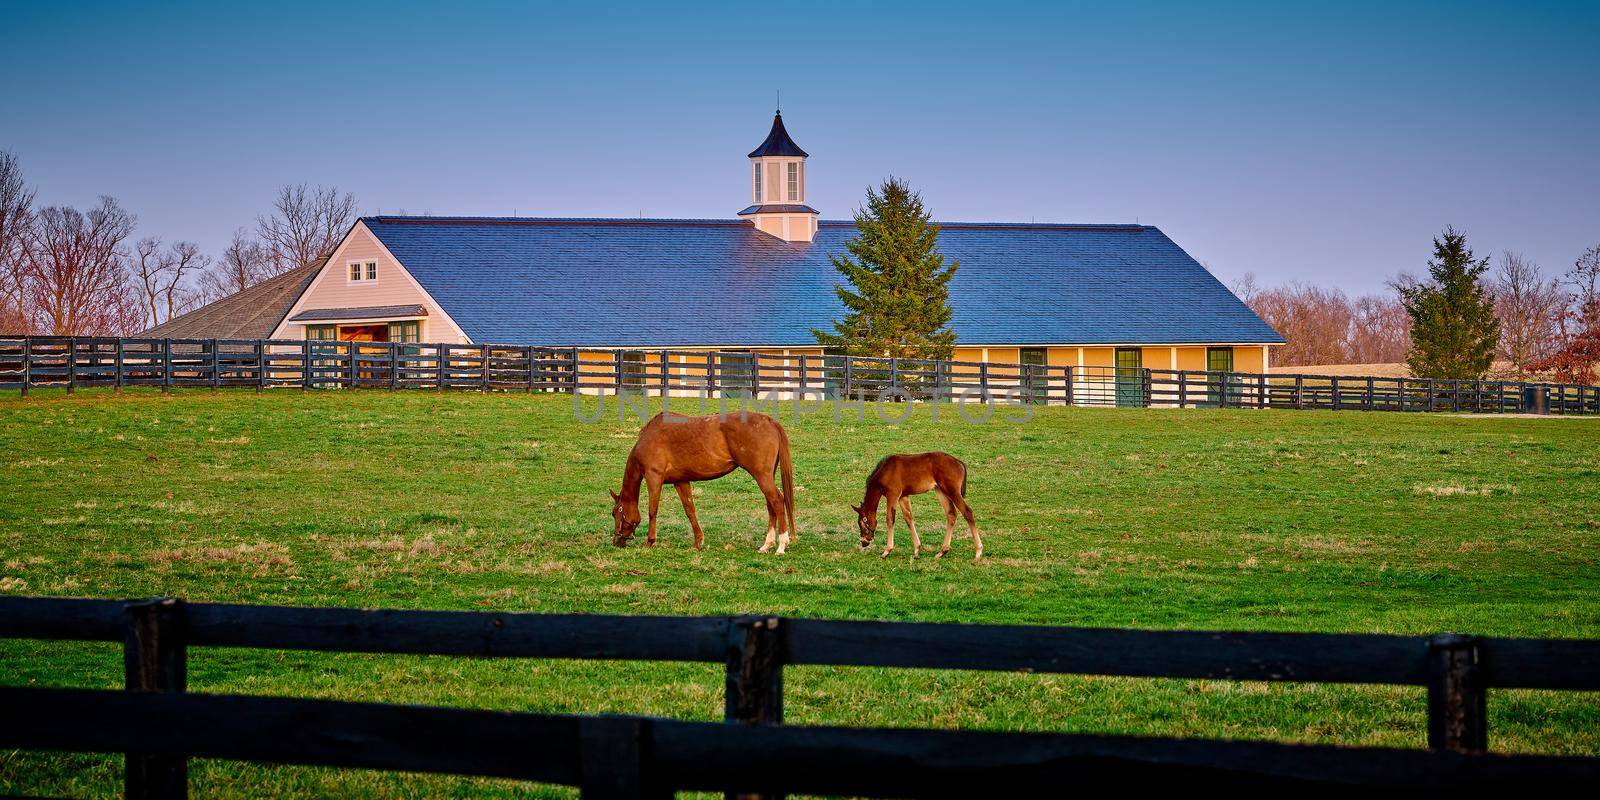 A mare and foal grazing on early spring grass with horse barn in the background. by patrickstock